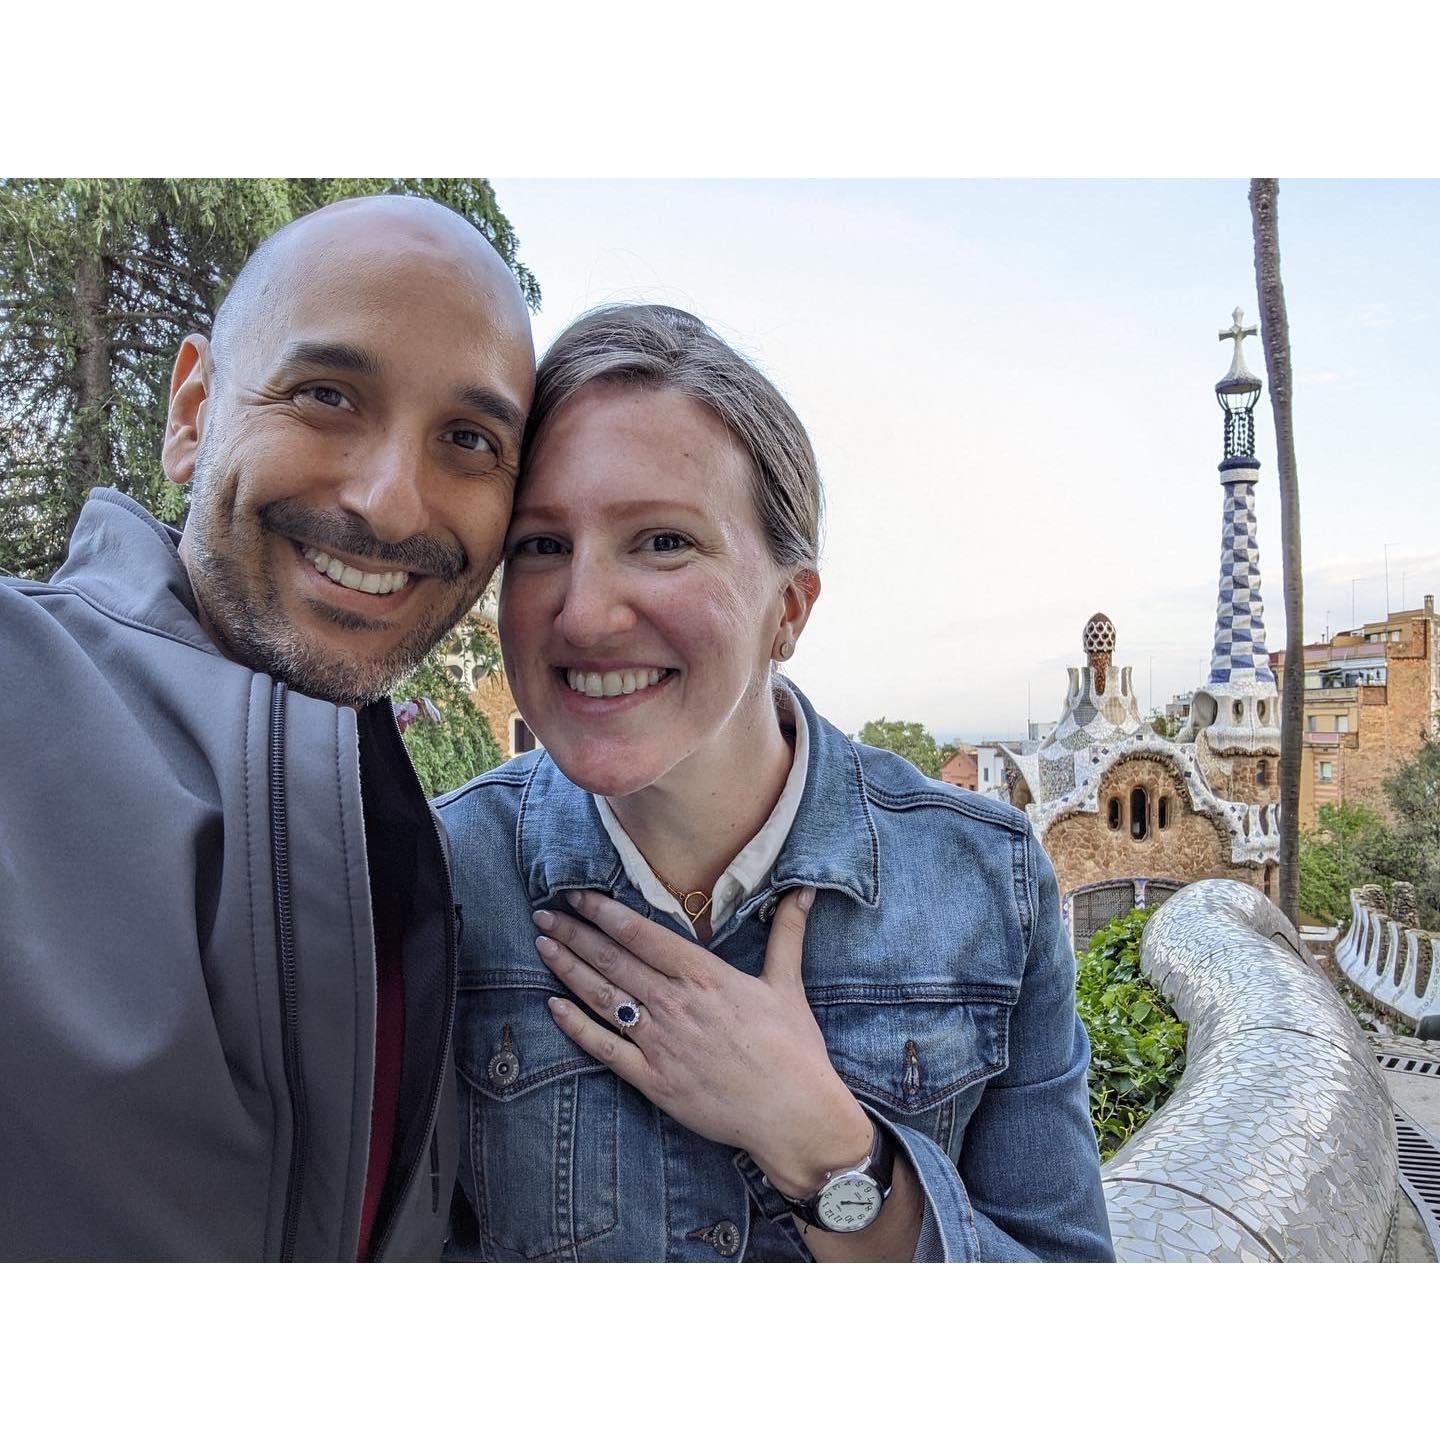 Moments after we got engaged in Park Güell, Barcelona